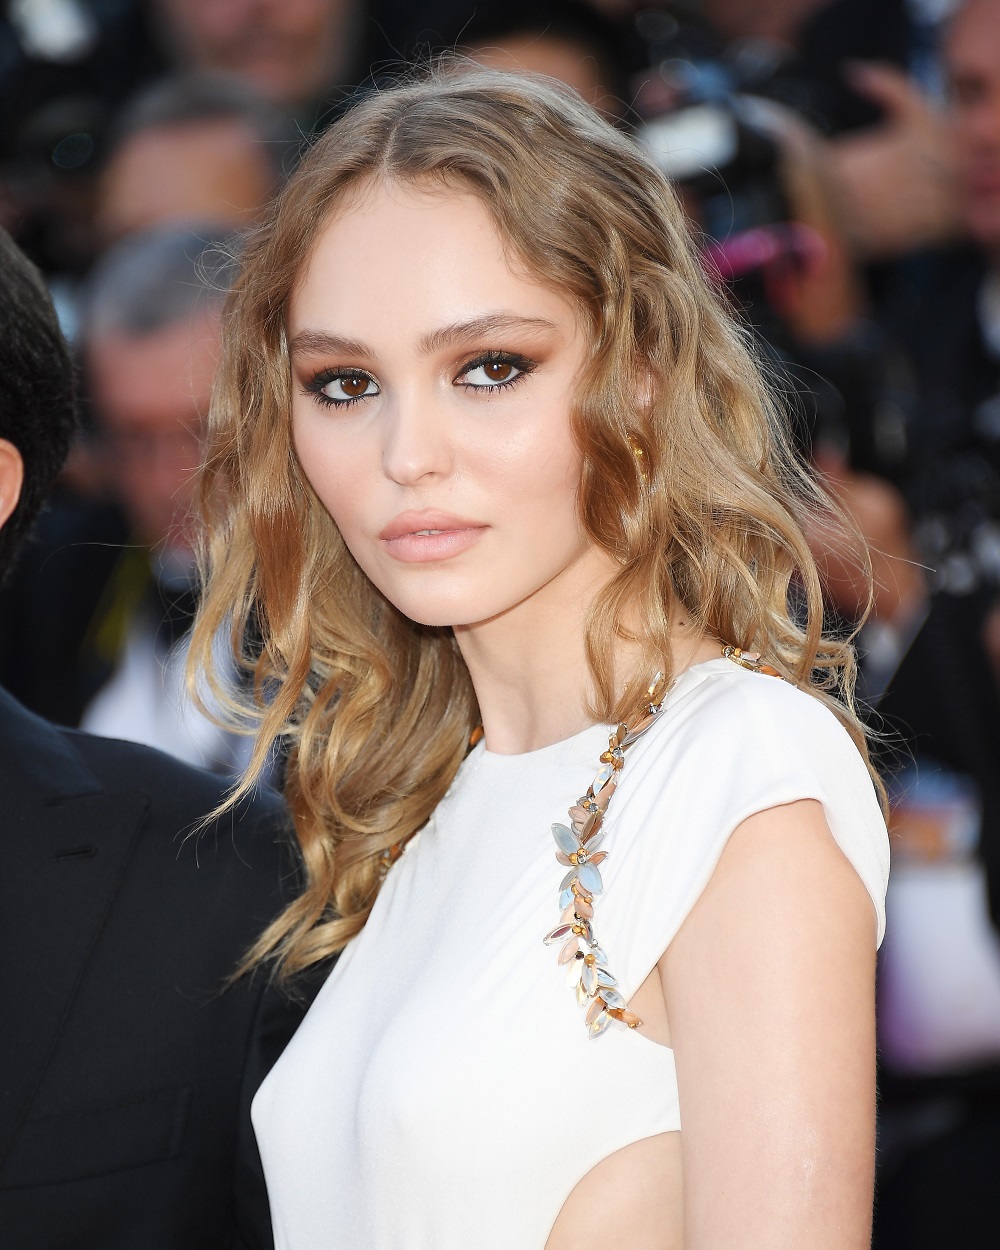 Lily-Rose Depp at the 